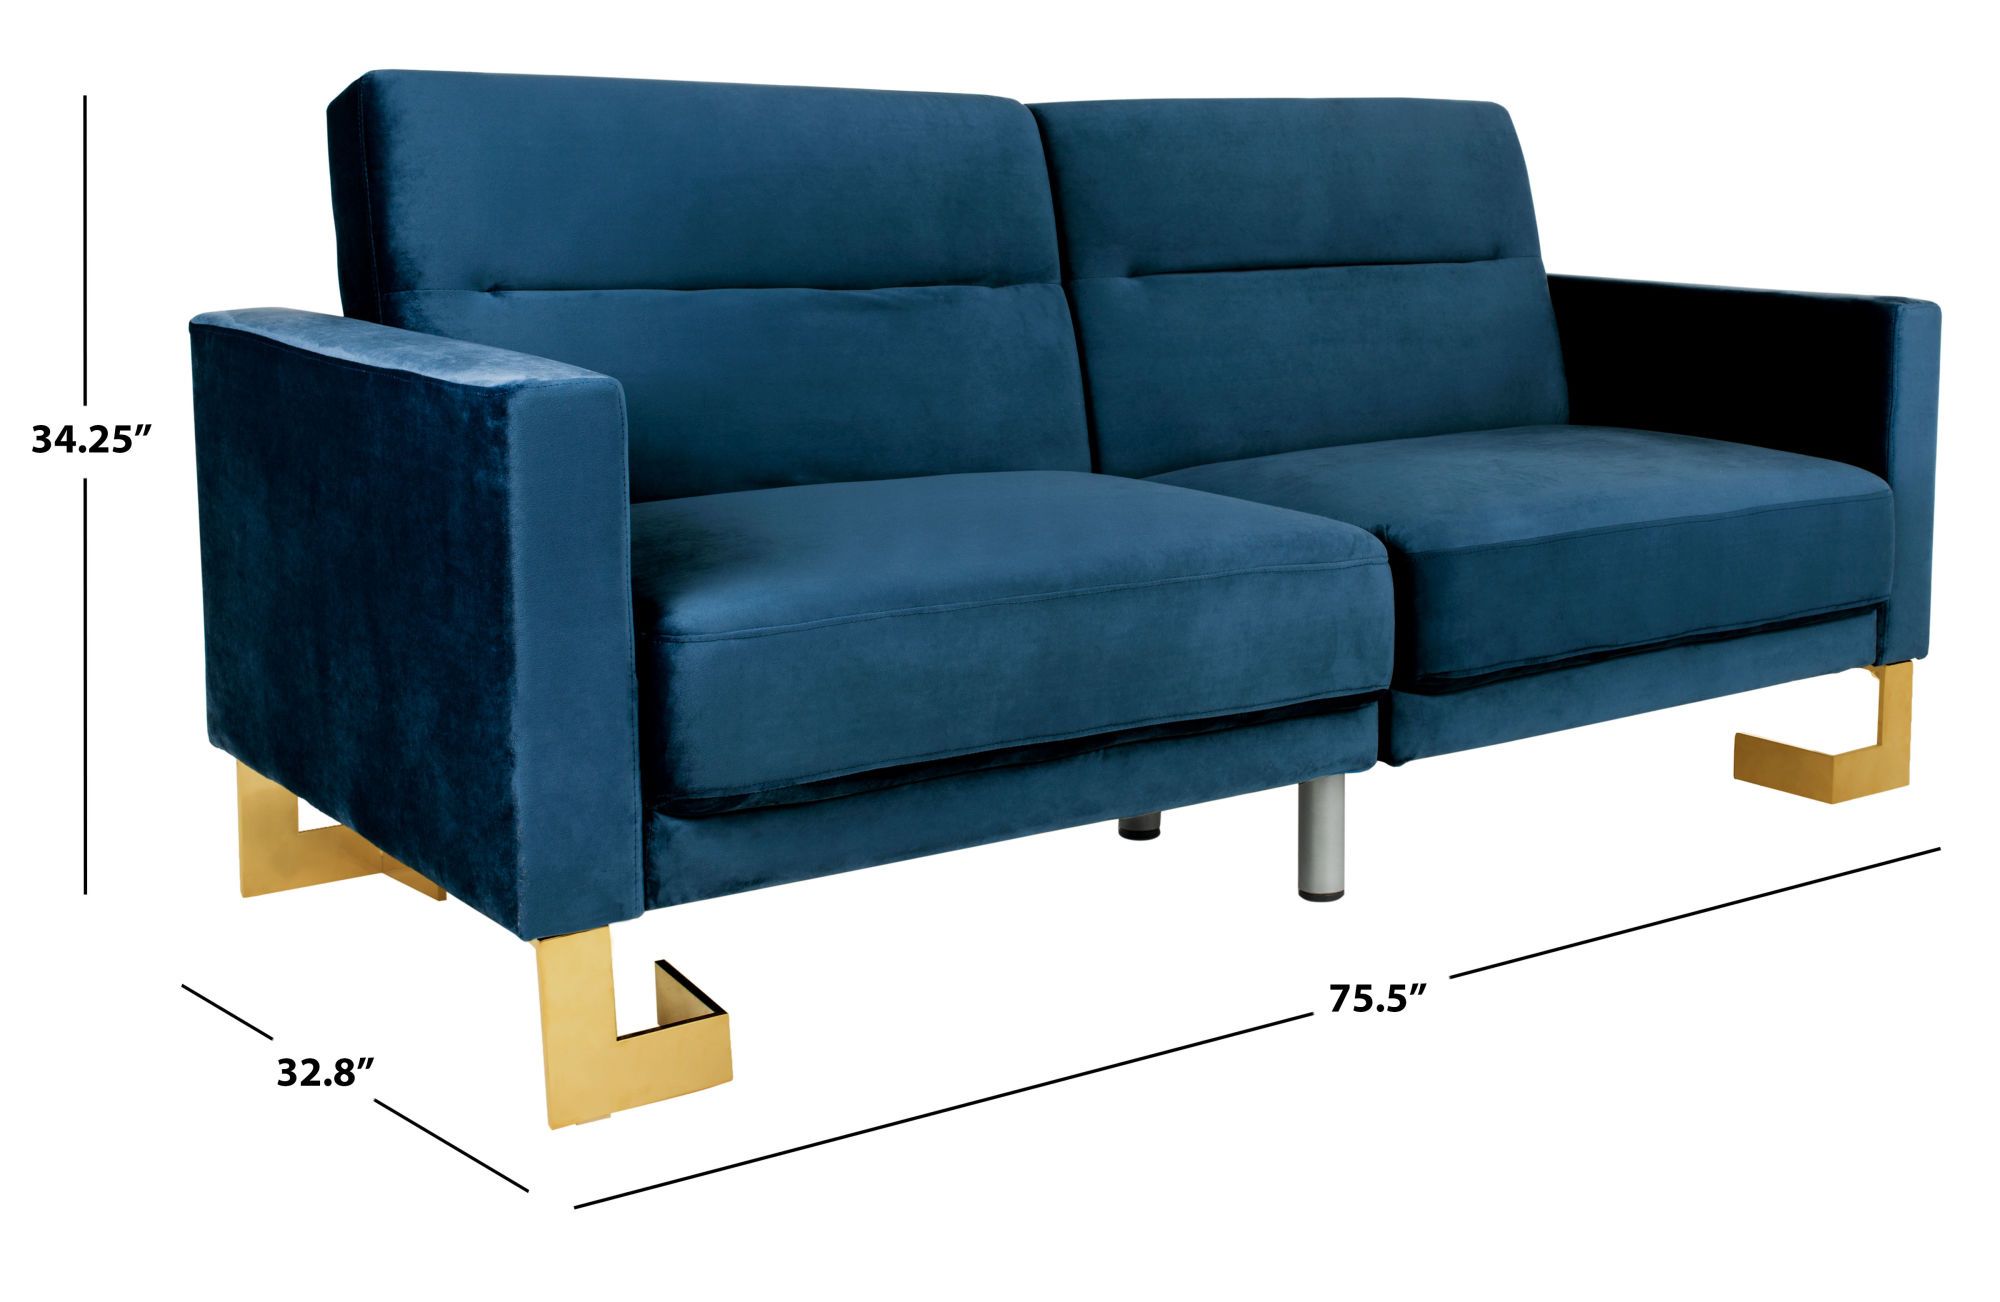 Tribeca Foldable Sofa Bed In Navy/brasssafavieh Within 2 In 1 Foldable Sofas (Gallery 20 of 20)